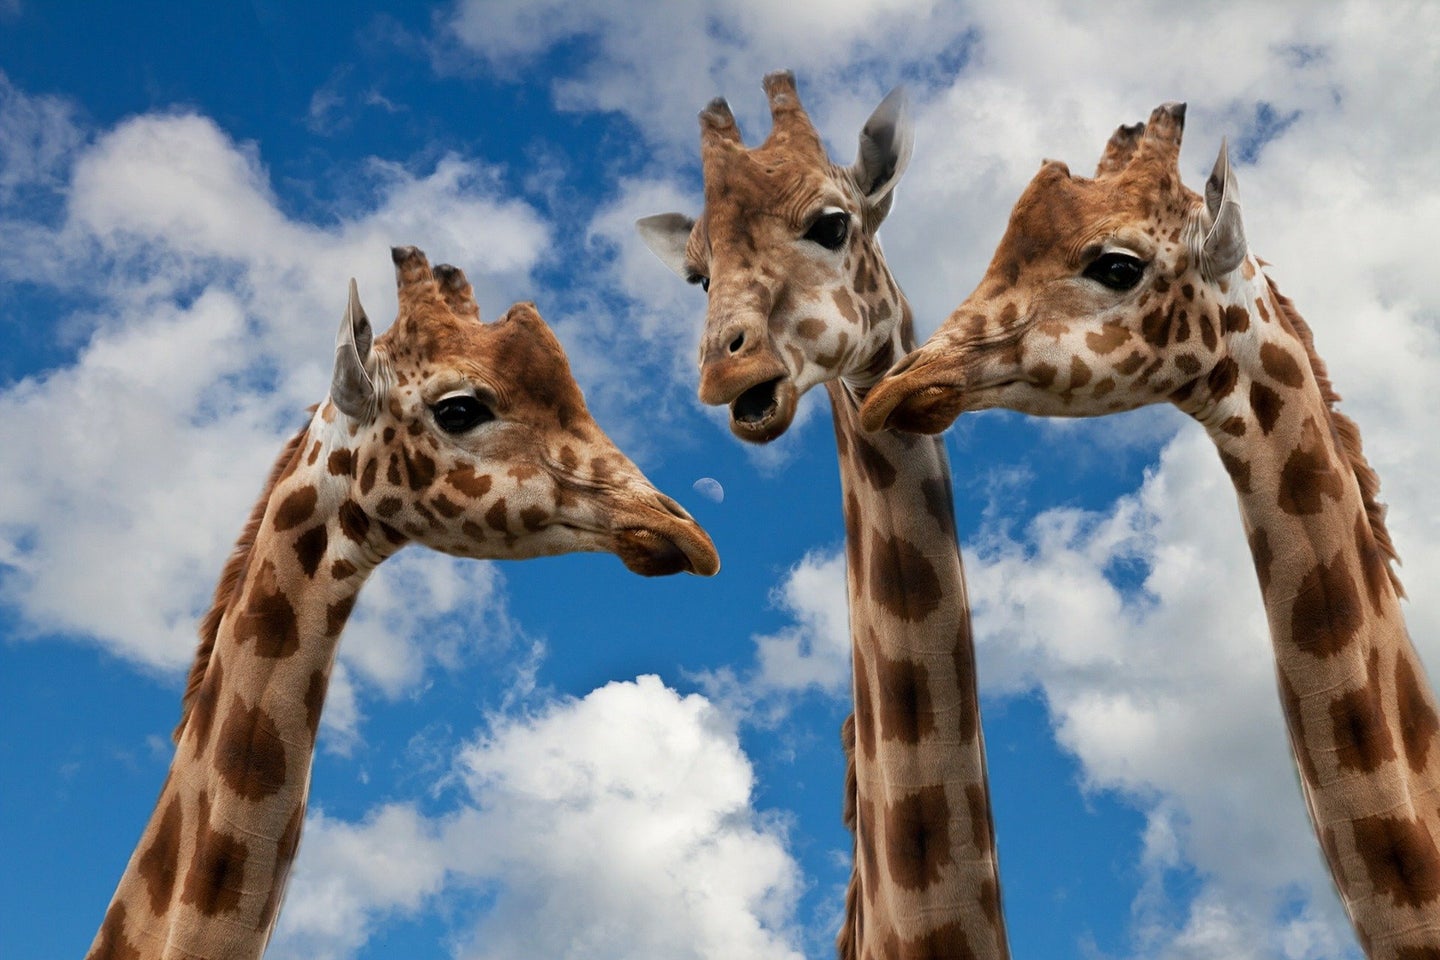 A trio of giraffes from the necks up against a cloudy sky backdrop.